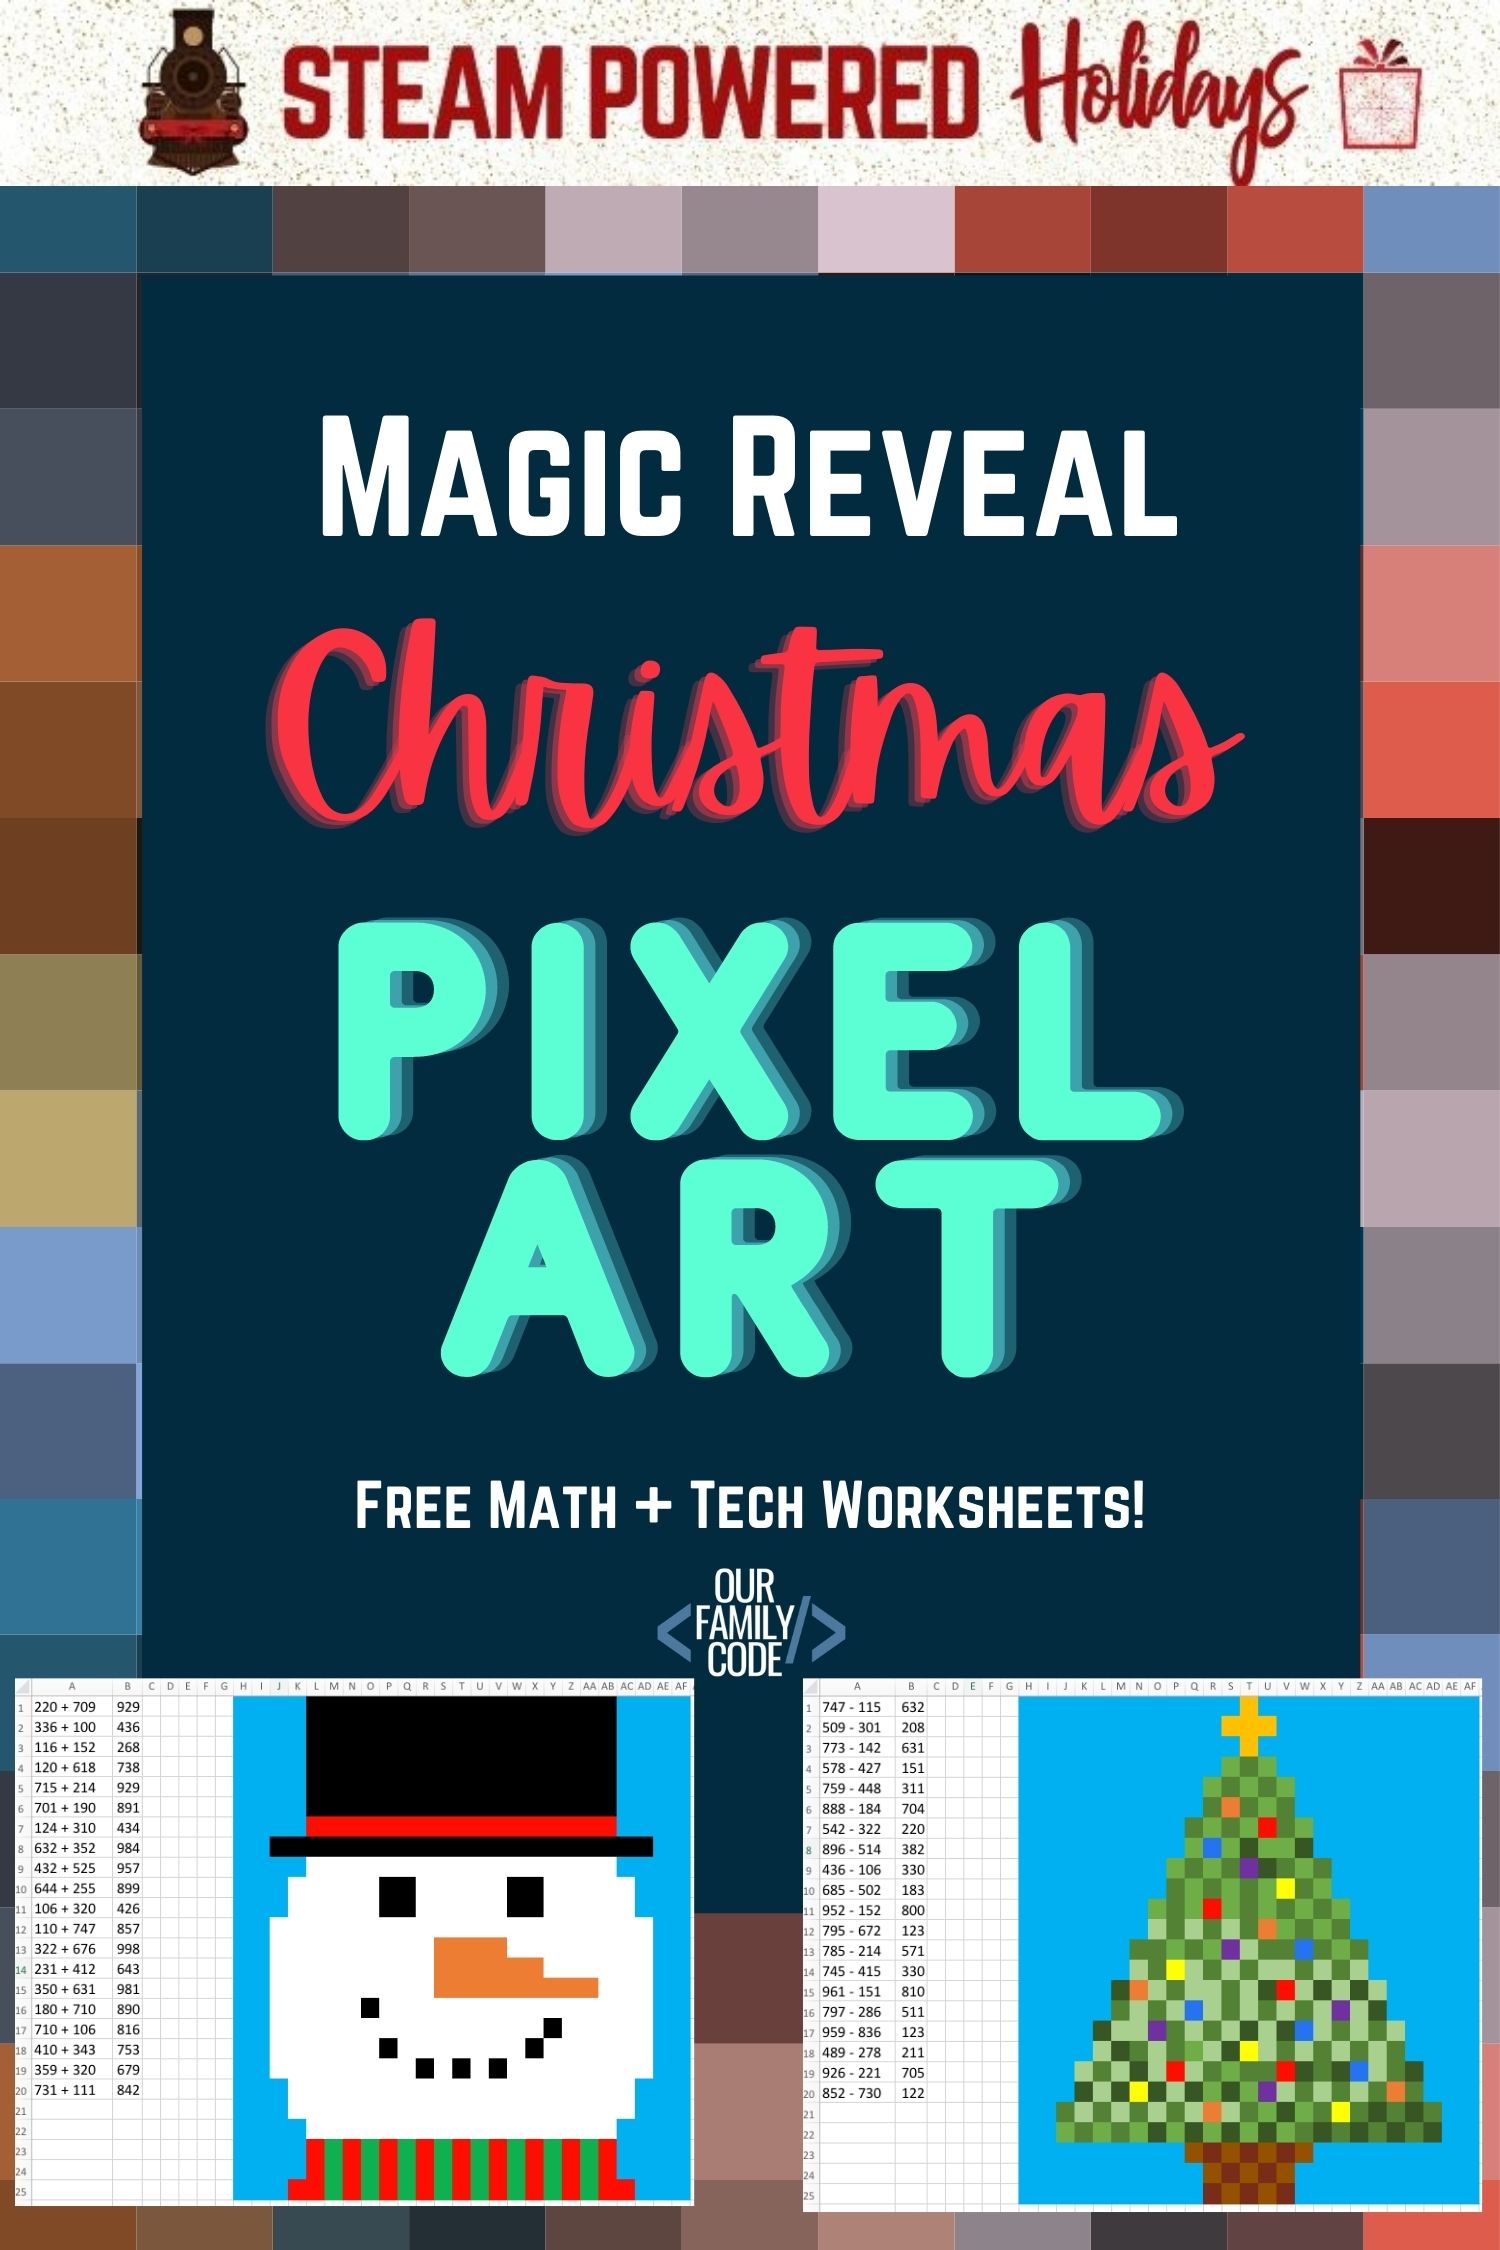 Magic reveal Christmas pixel art Magic reveal Christmas pixel art is a super neat way to incorporate math and technology into a fun learning activity!